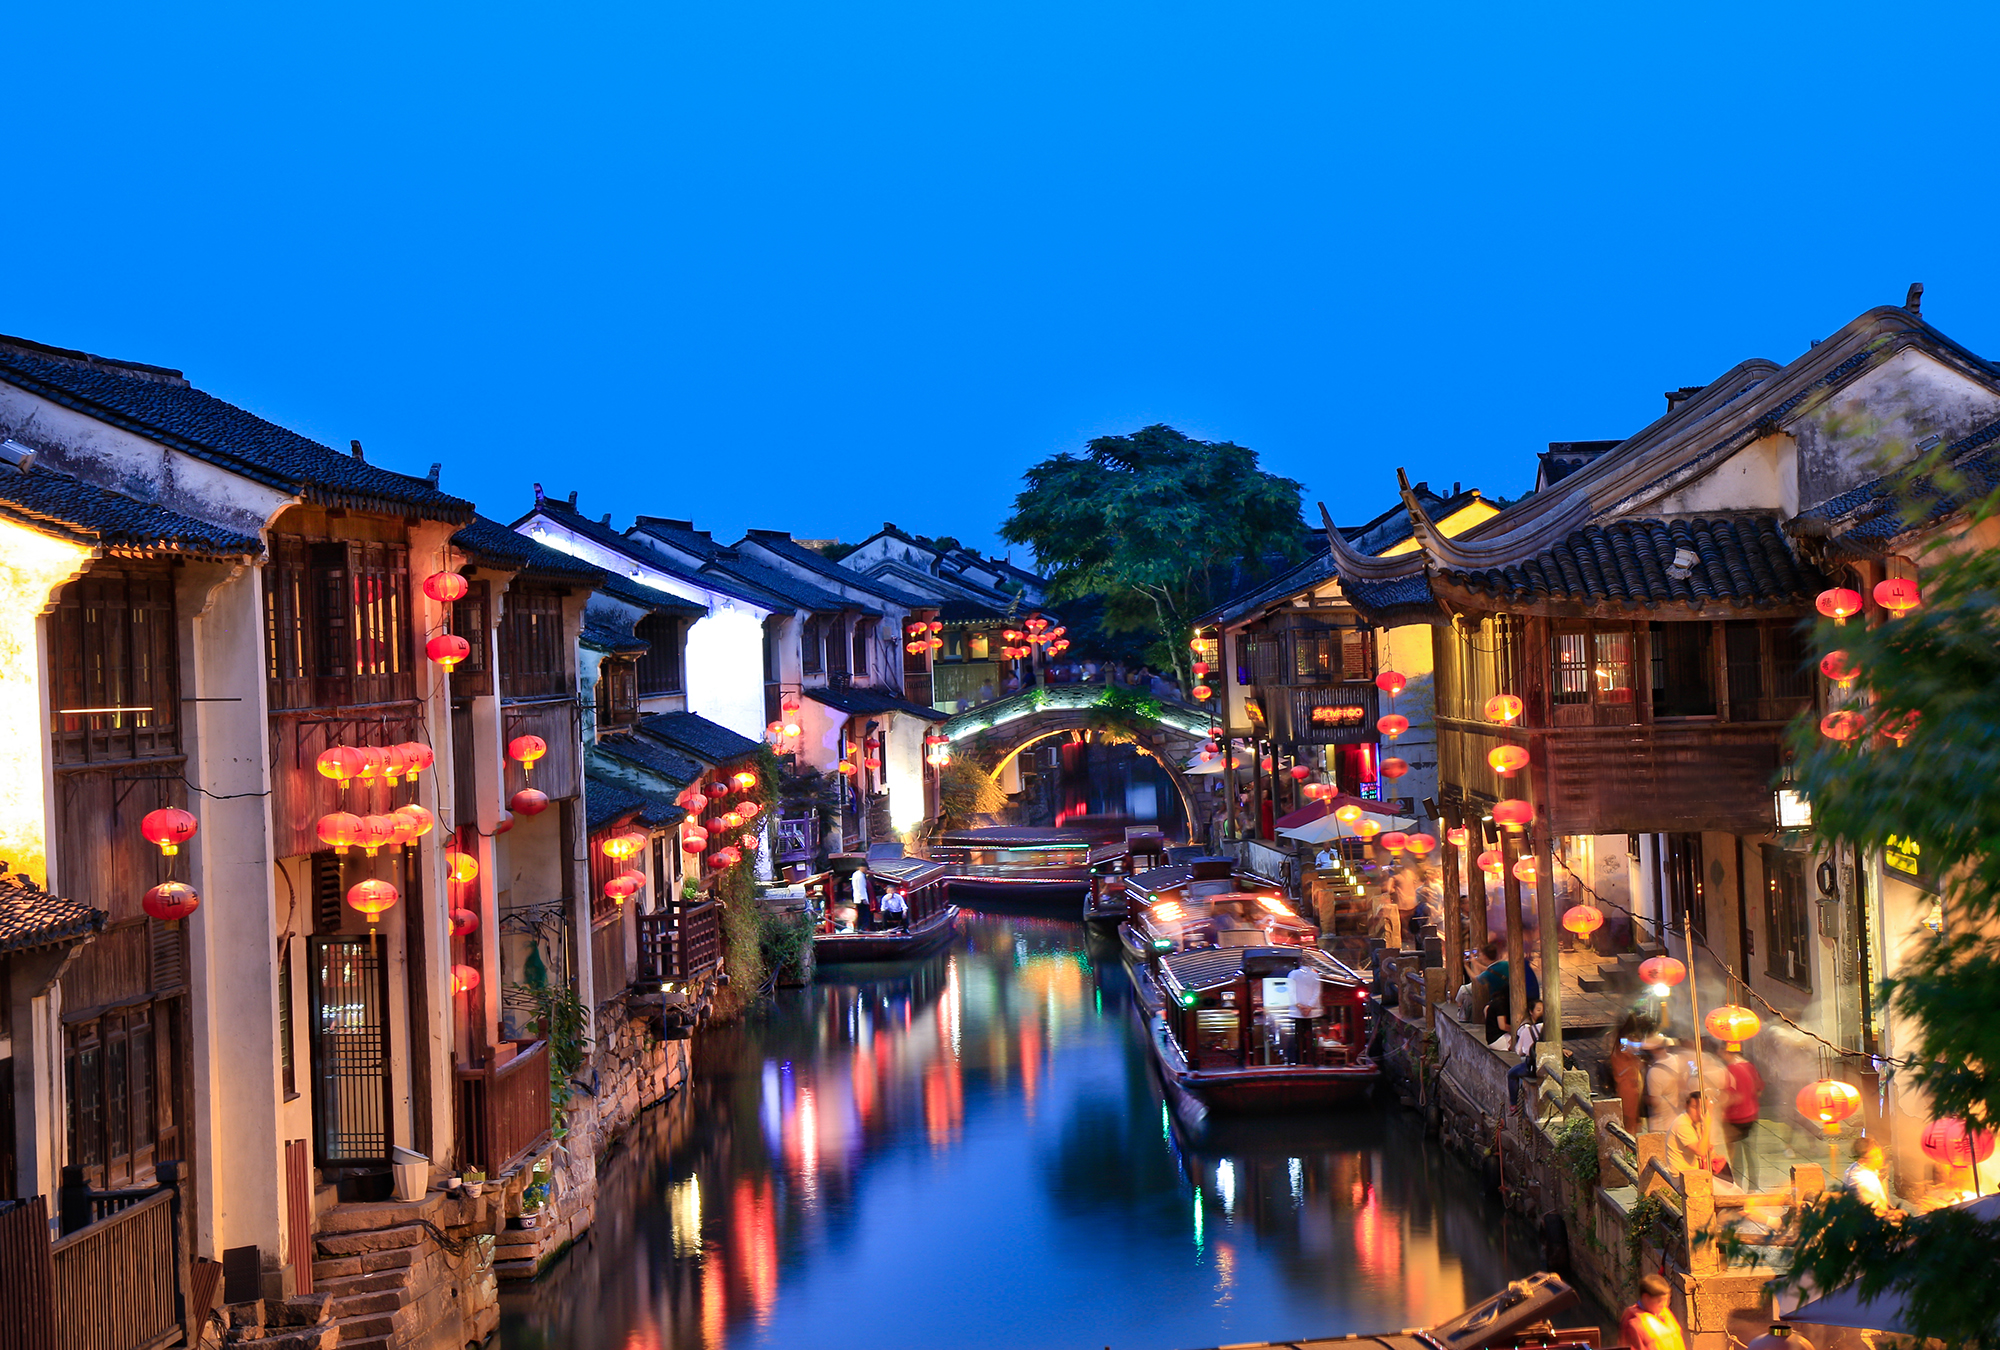 Jiashan is a county in the Zhejiang province and offers numerous opportunities for excursions.